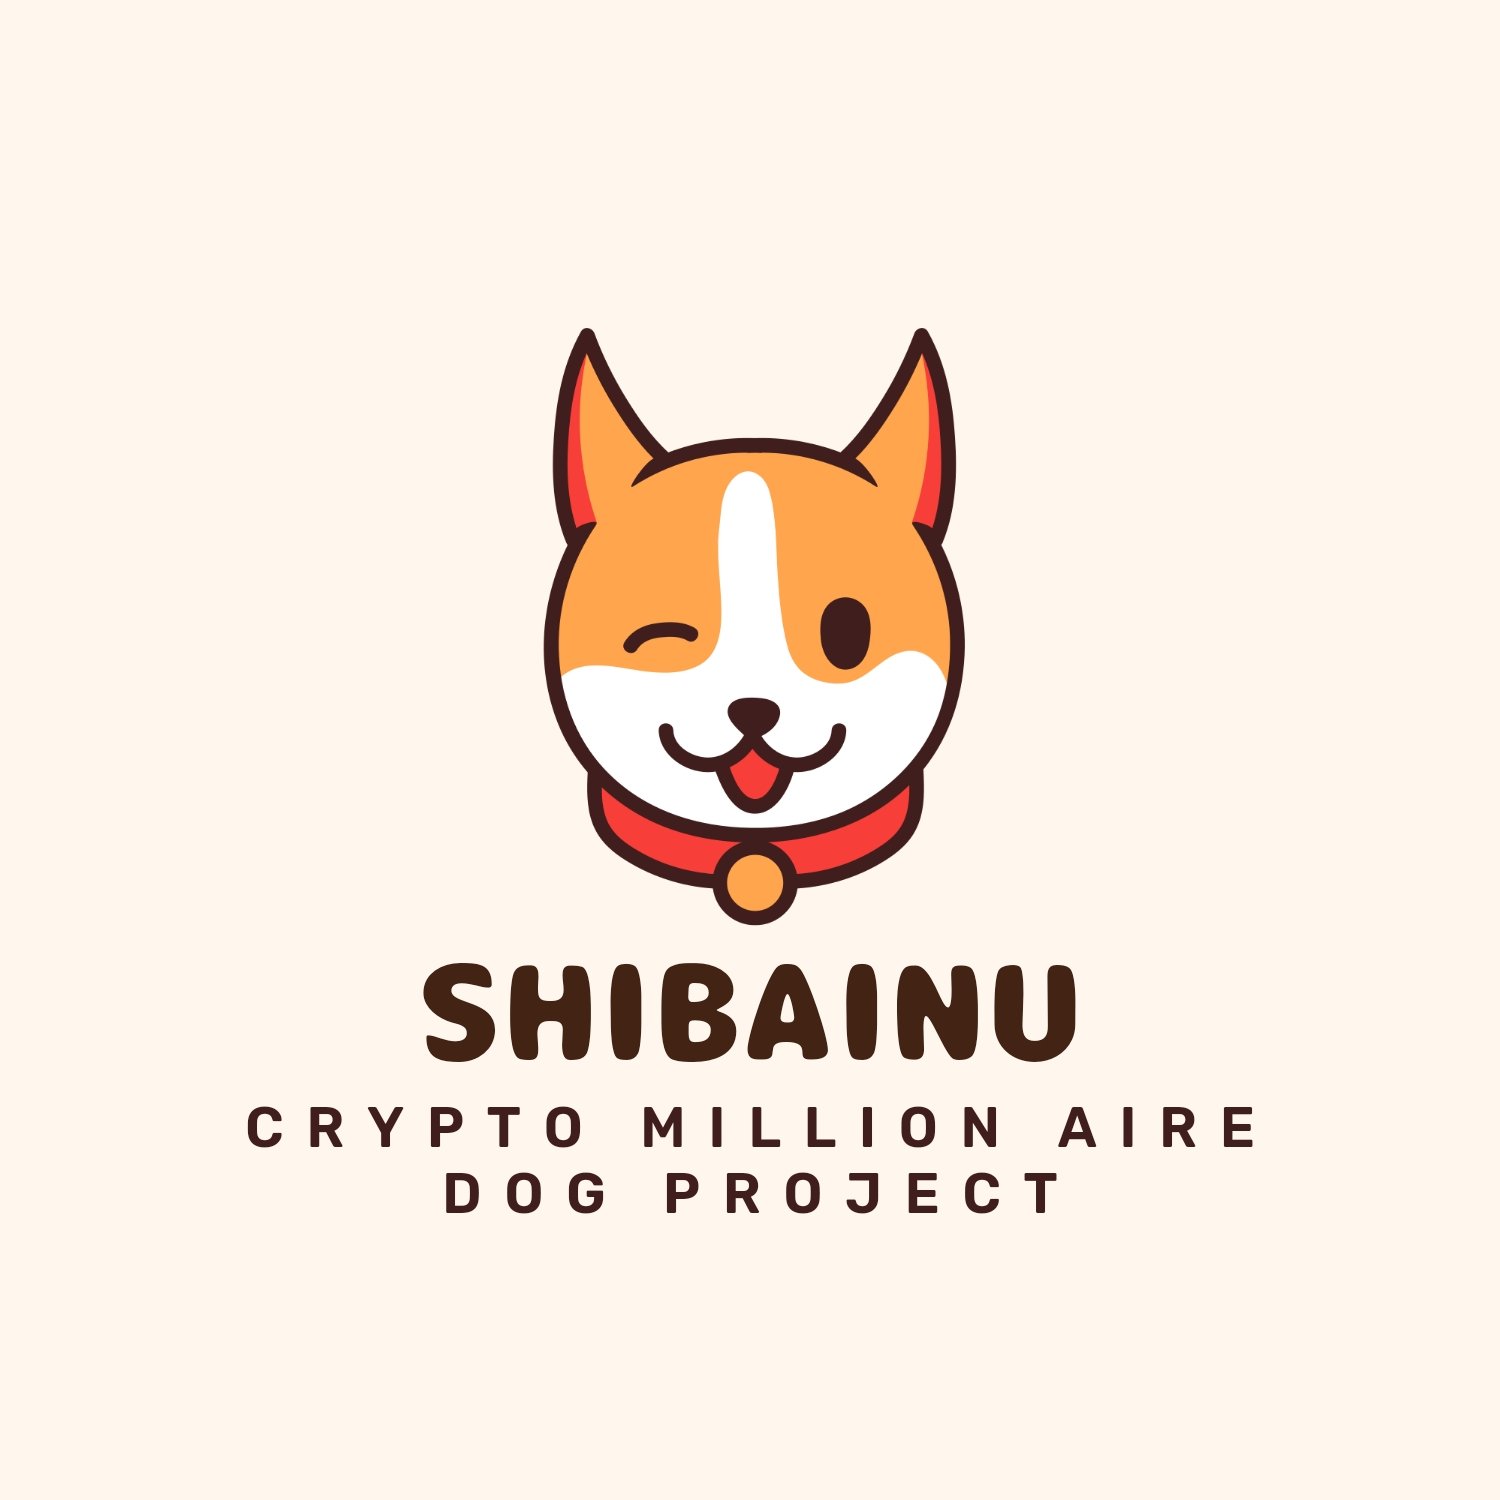 Is Shibainu Crypto Millionaire Dog the Future of NFT Investment in 2023?